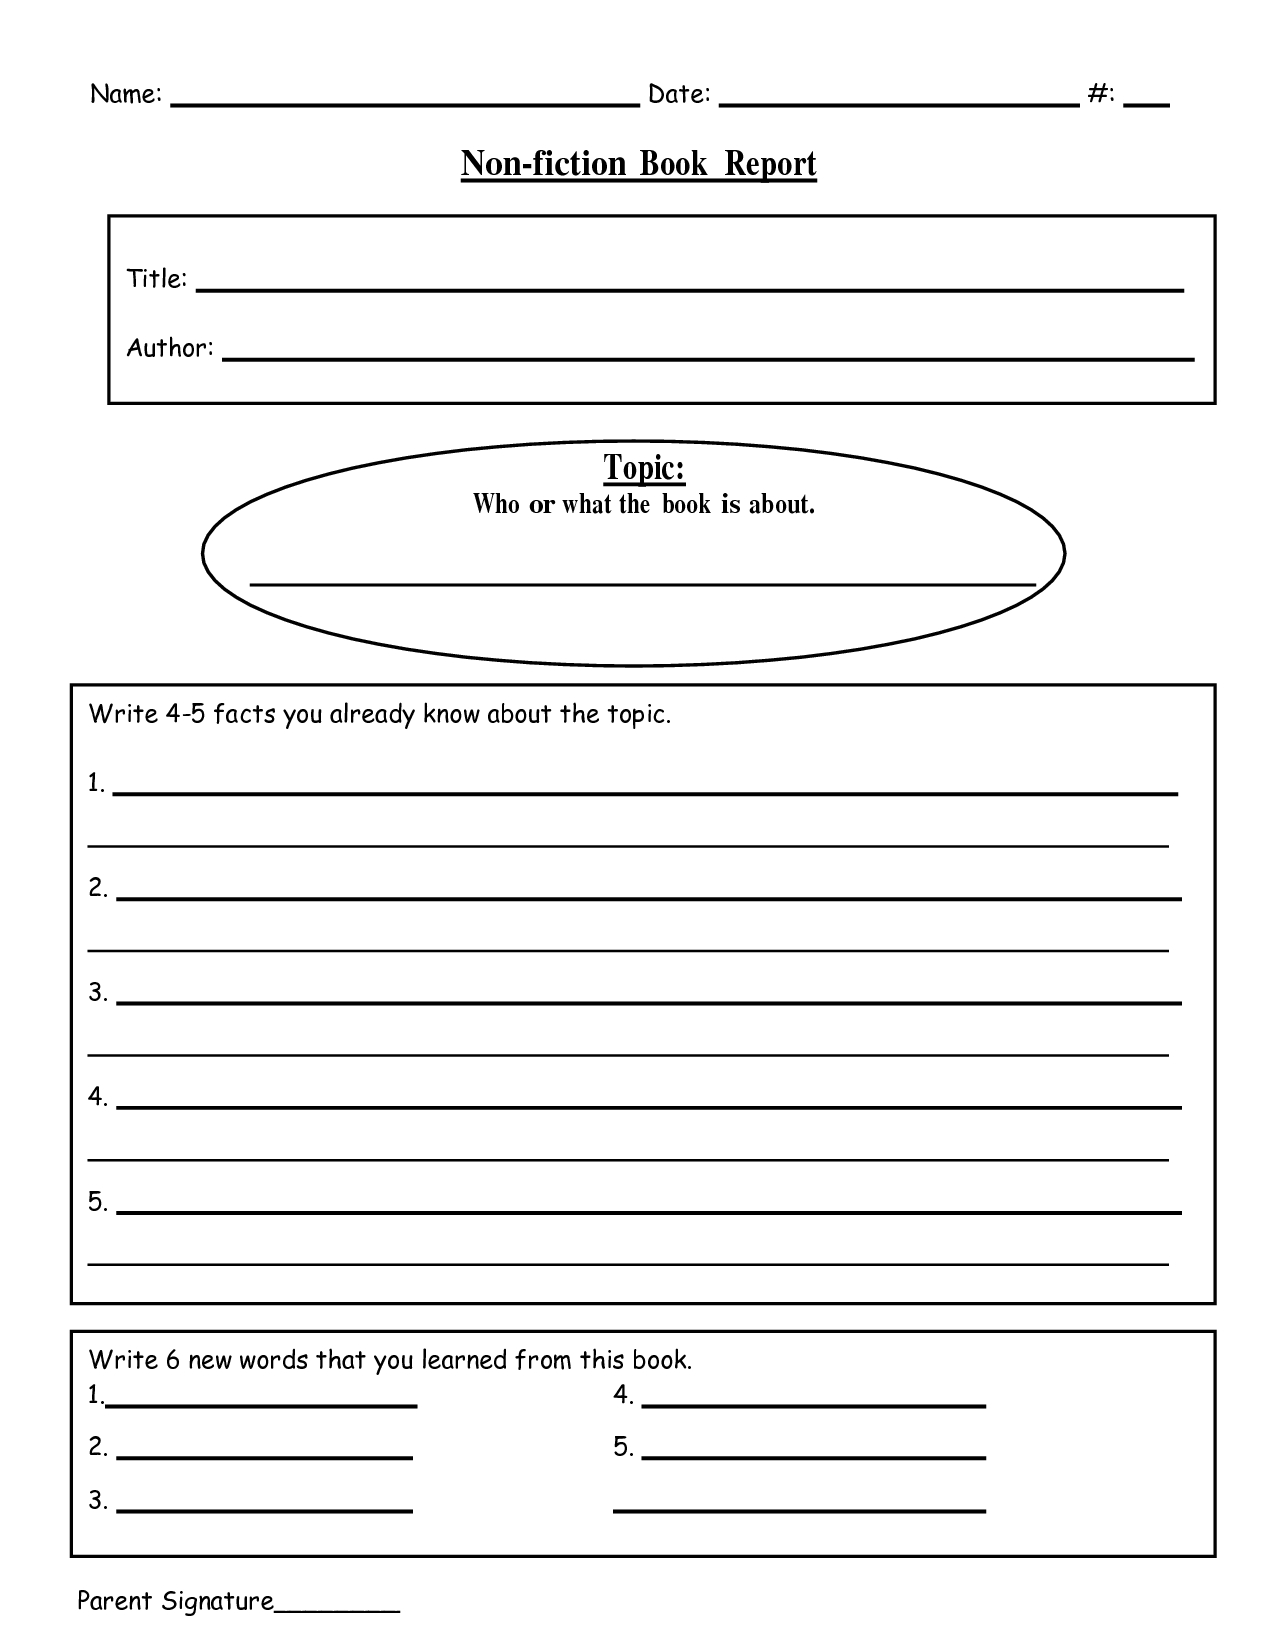 28 Images Of 5Th Grade Non Fiction Book Report Template | Somaek - Free Printable Books For 5Th Graders